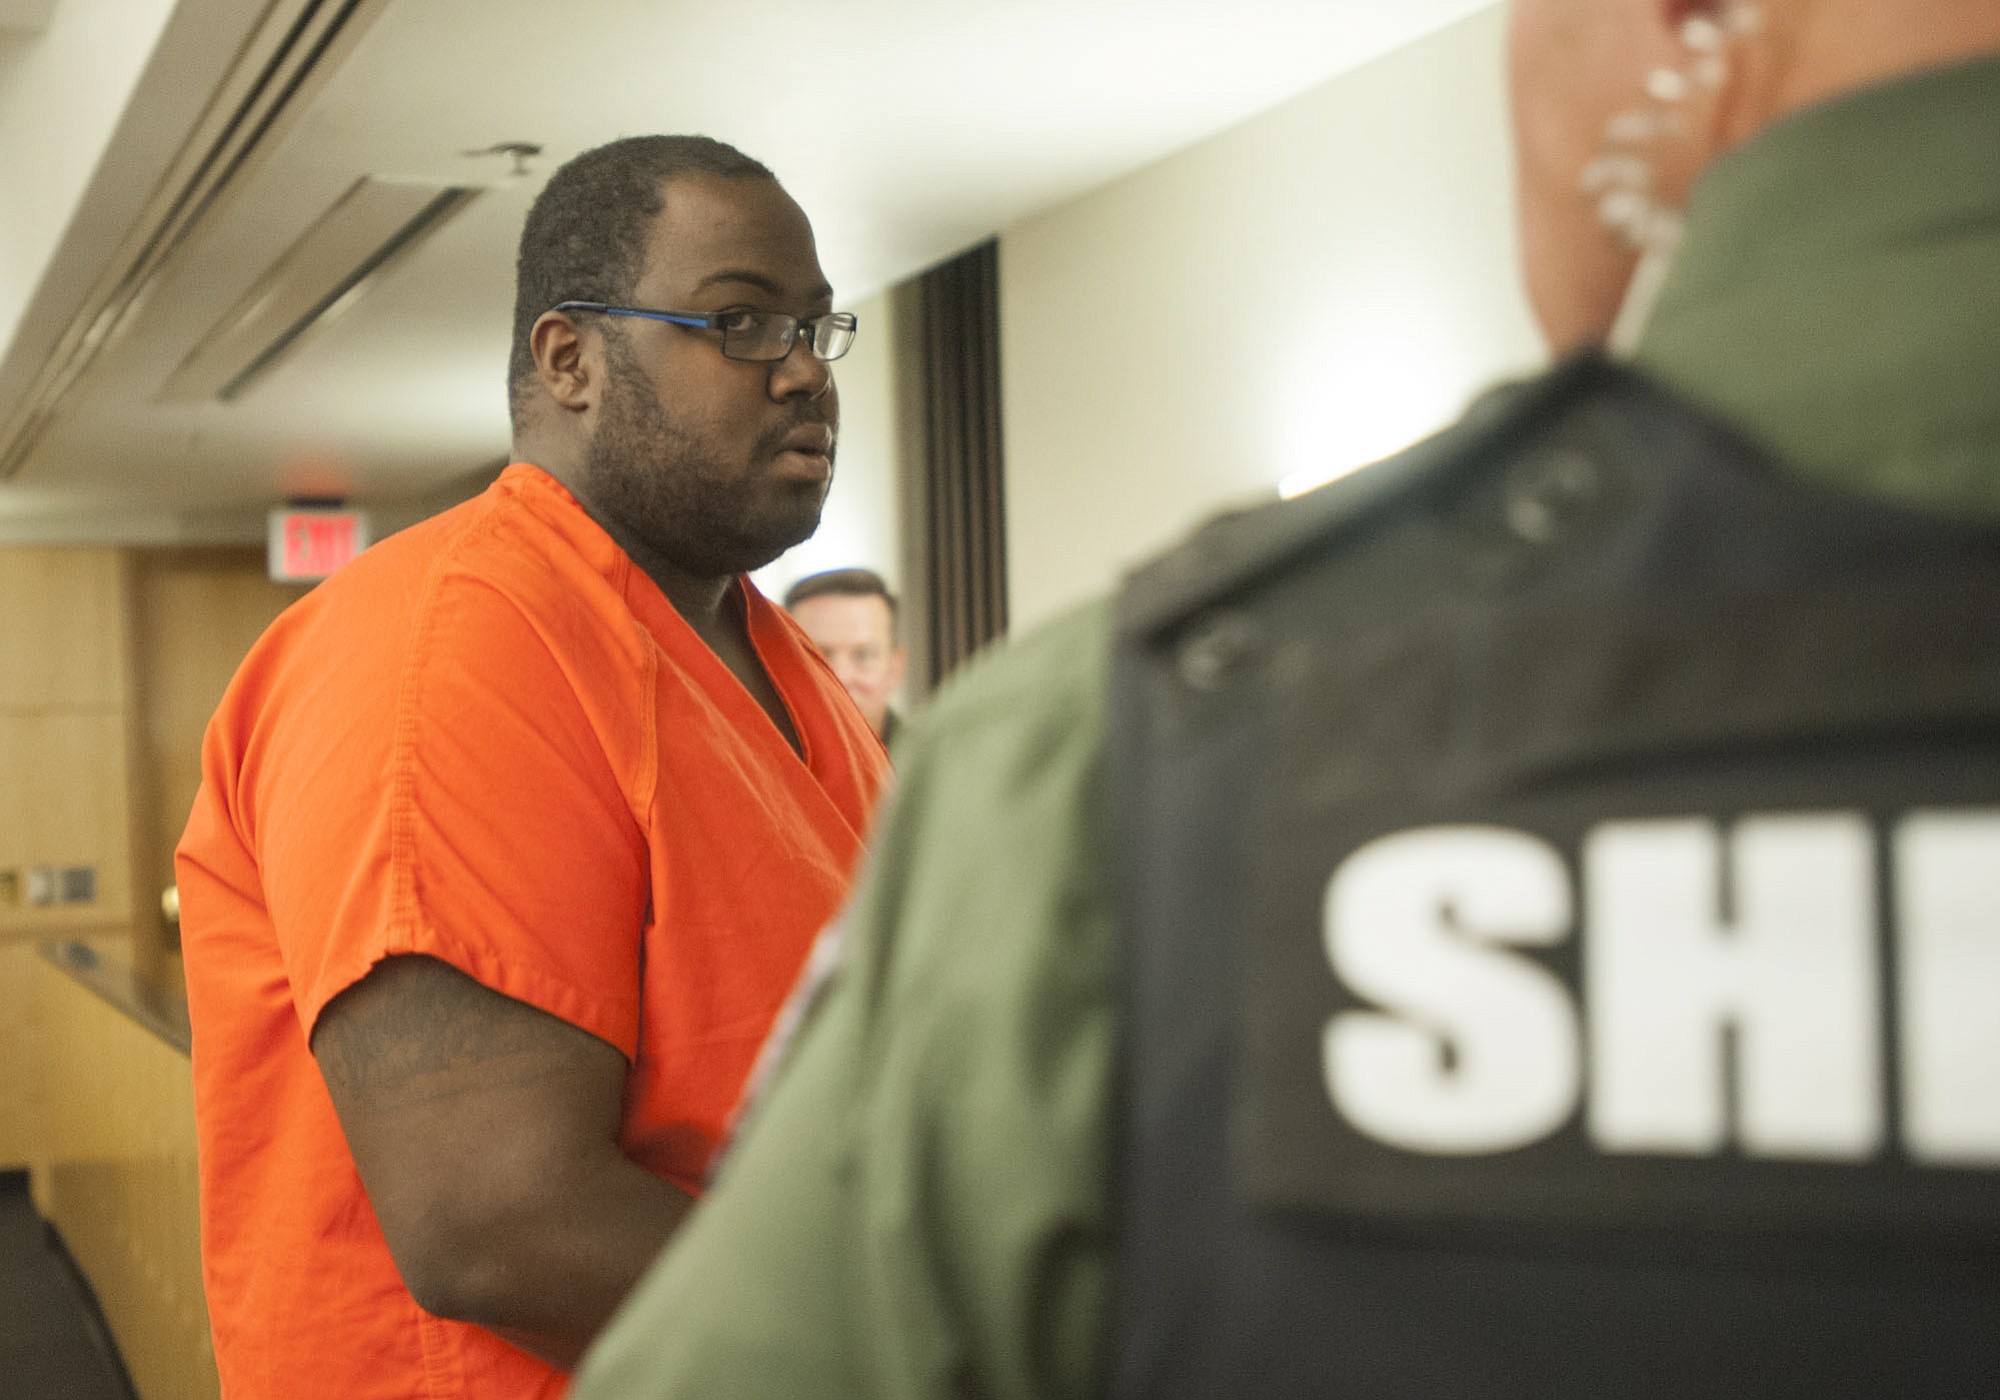 David Jackson, 26, of Portland appears in Clark County Superior Court on April 27.